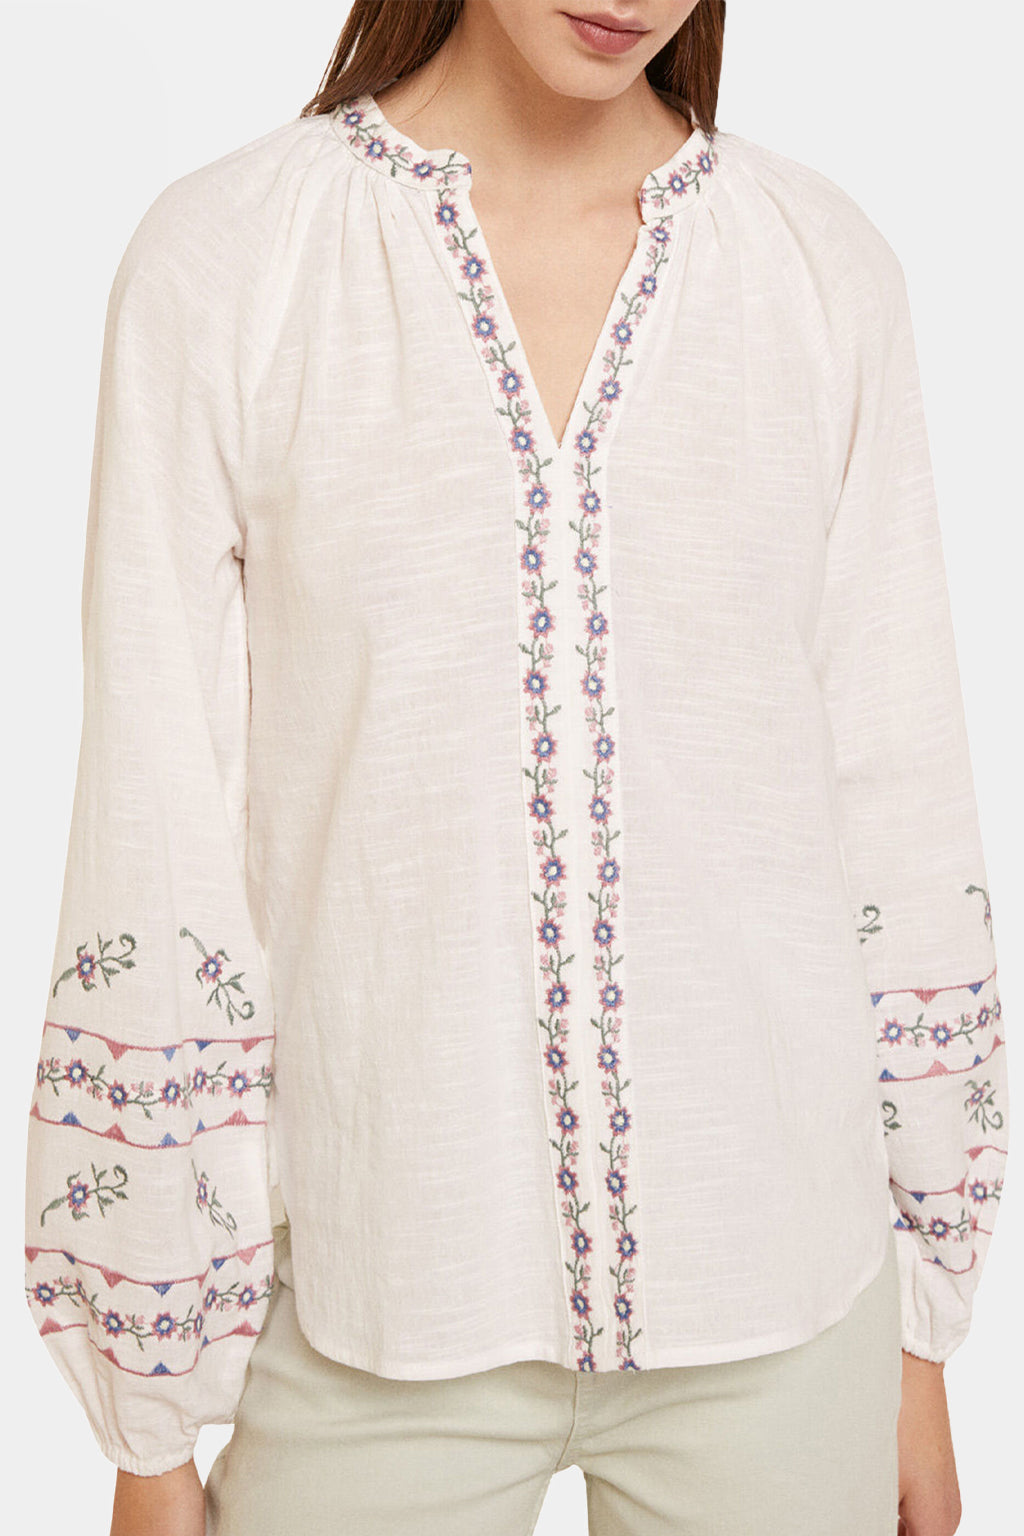 Spring Field - Long-Sleeved Floral Blouse